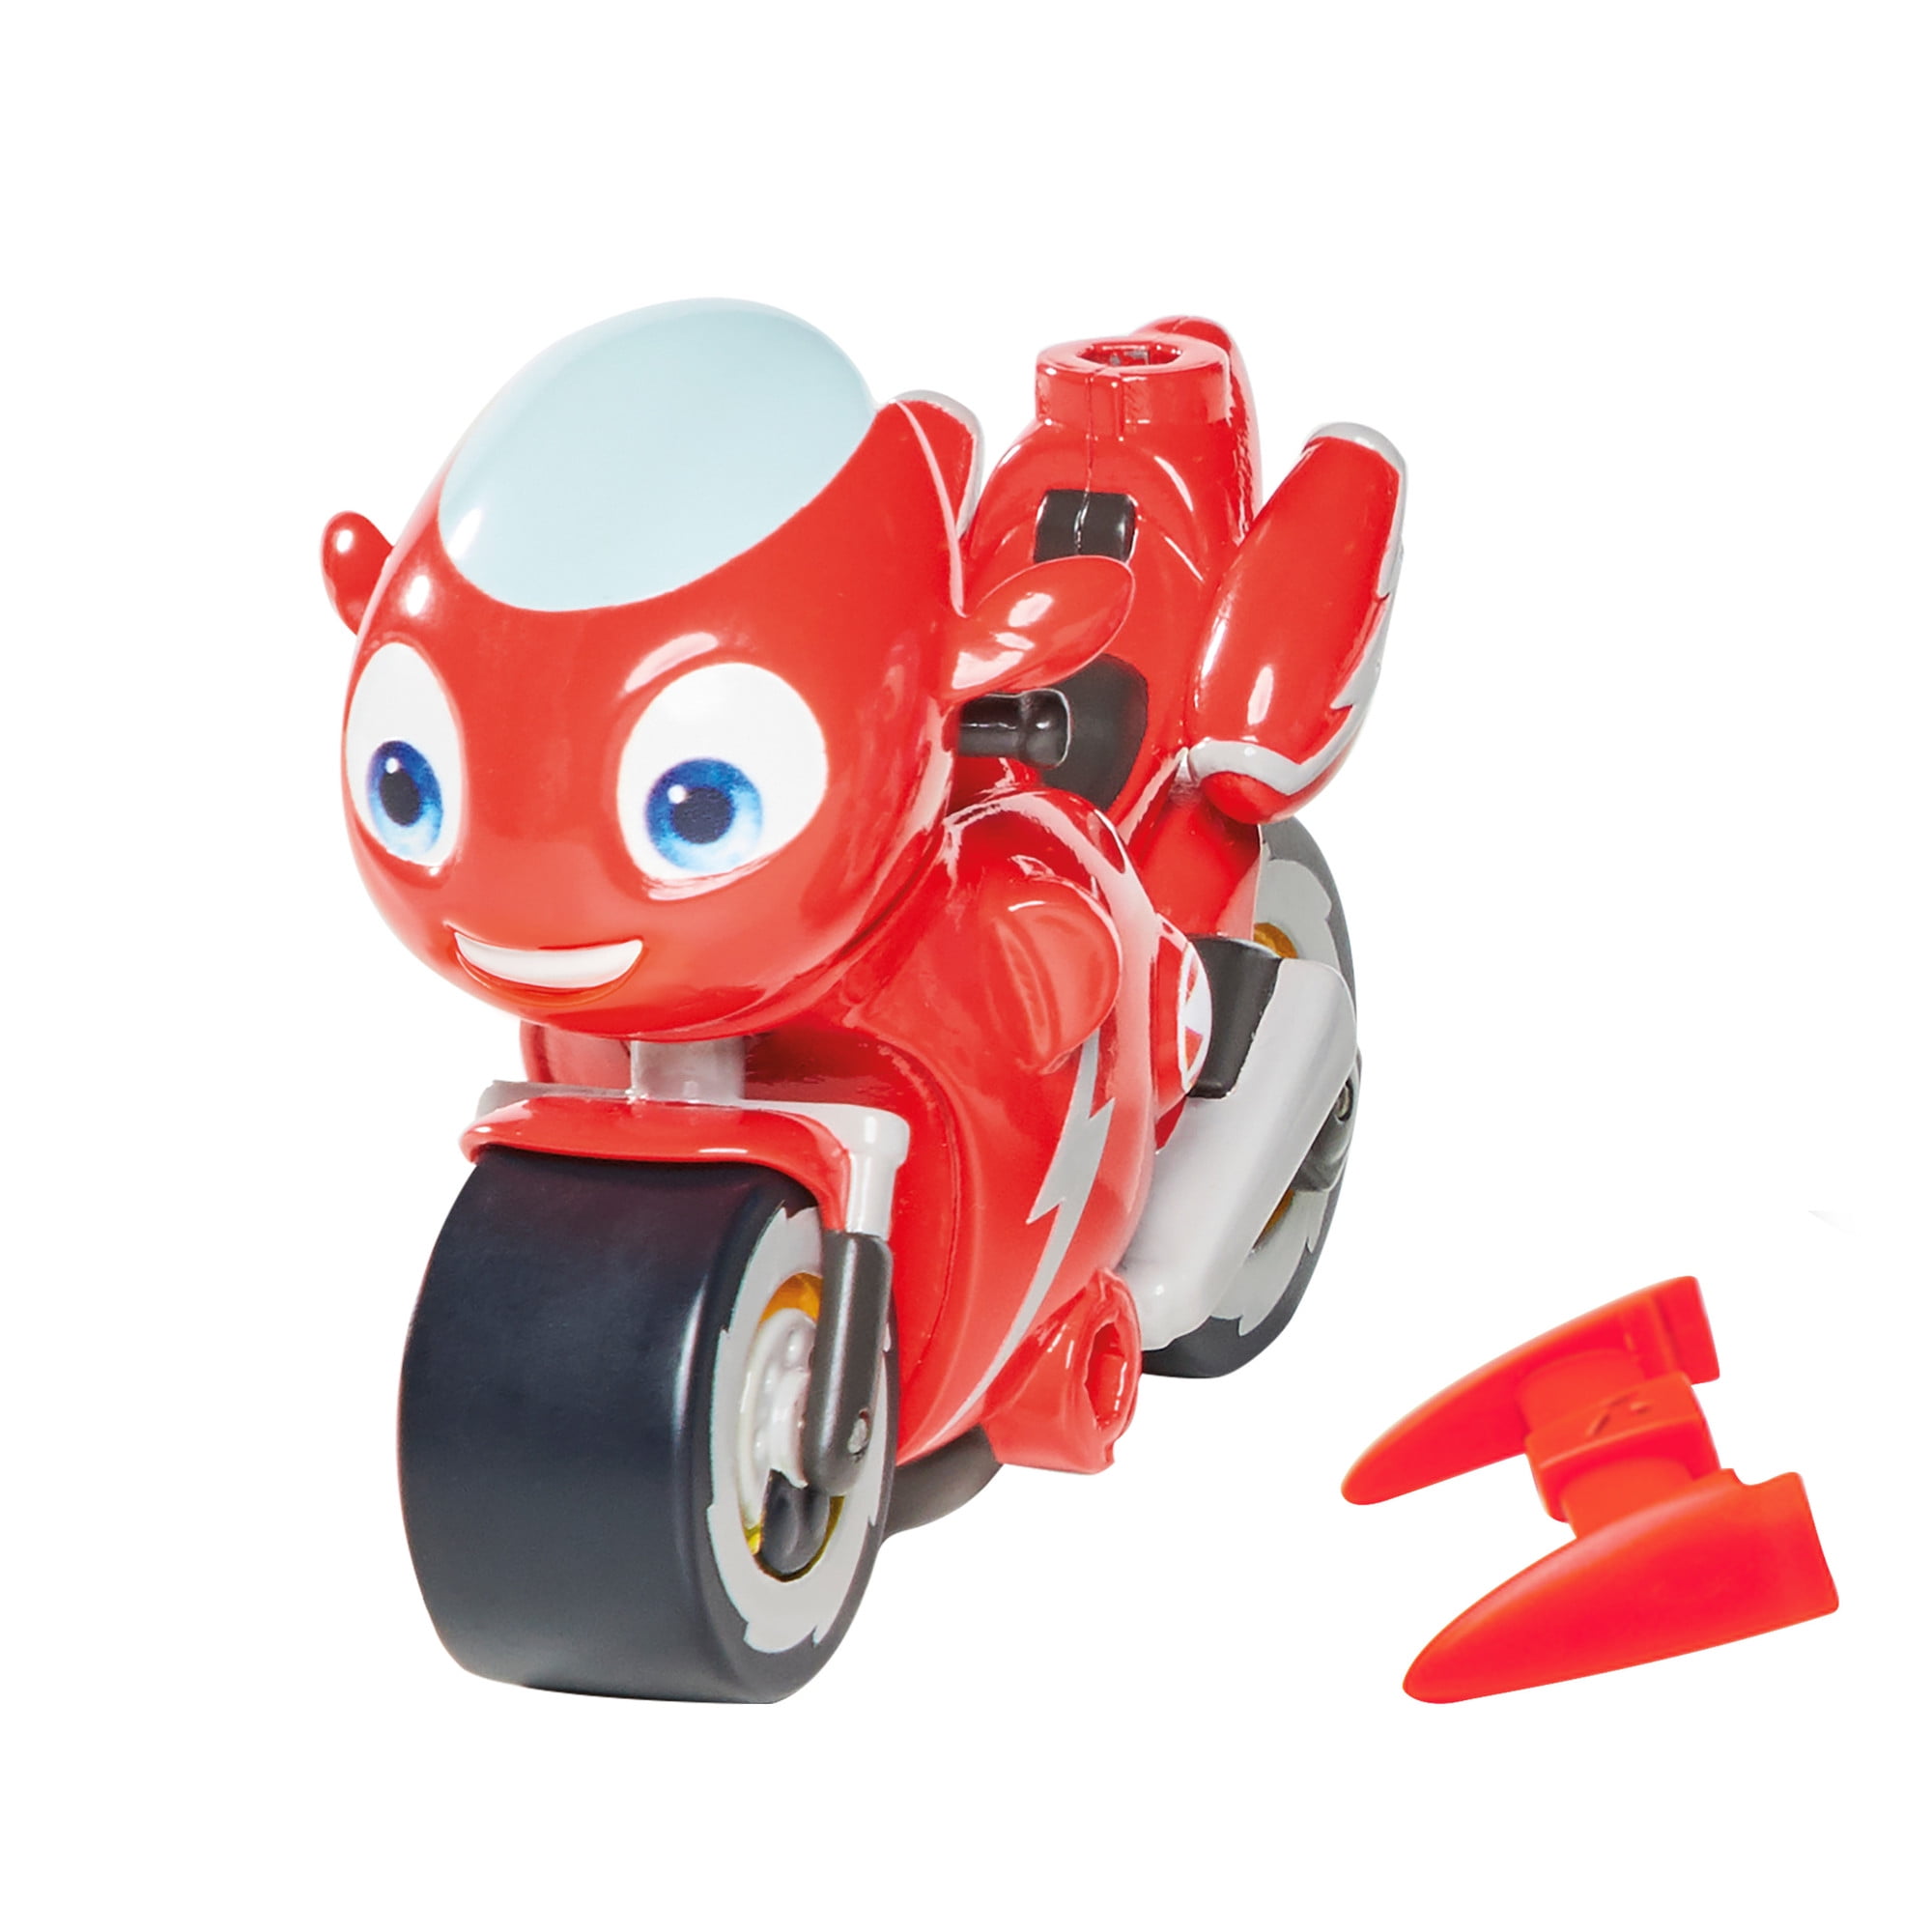 Ricky Zoom Toy Motorcycle 3 Inch Action Figure Free-Wheeling and Free  Standing Toy Bike Play Vehicle